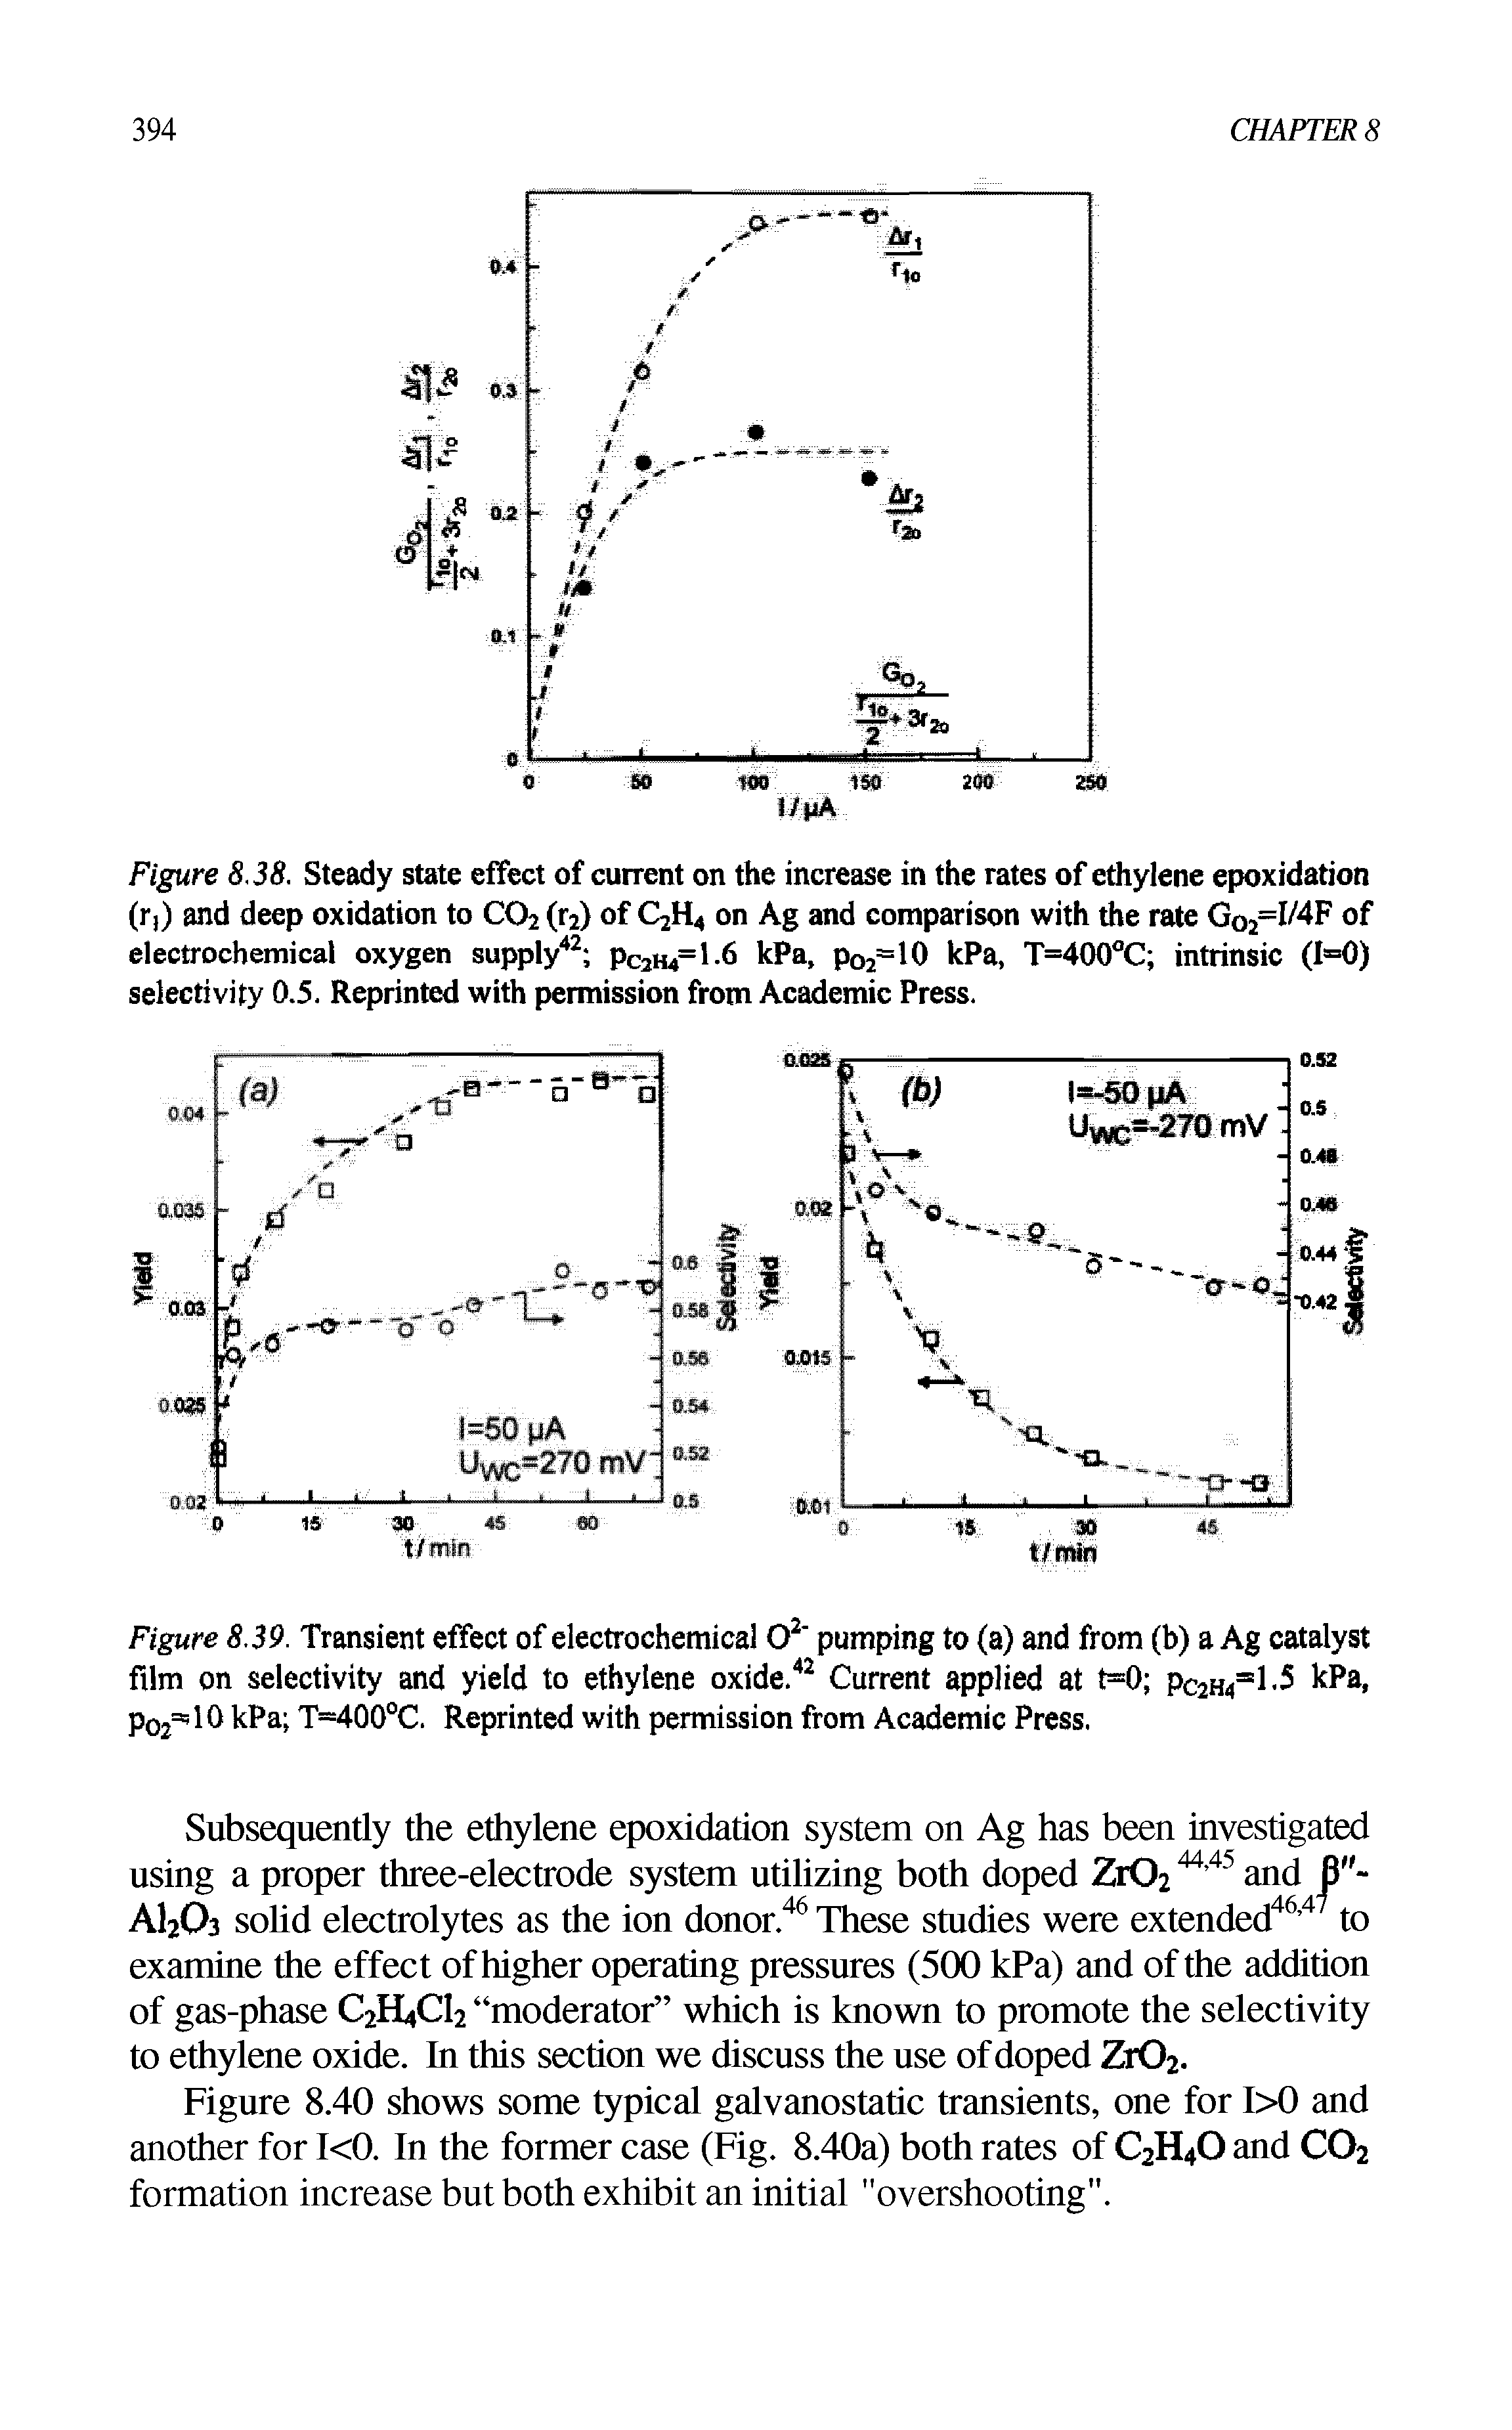 Figure 8.39. Transient effect of electrochemical O2 pumping to (a) and from (b) a Ag catalyst film on selectivity and yield to ethylene oxide.42 Current applied at t=0 Pc2H4=1-5 kPa, p02= 10 kPa T=400°C. Reprinted with permission from Academic Press.